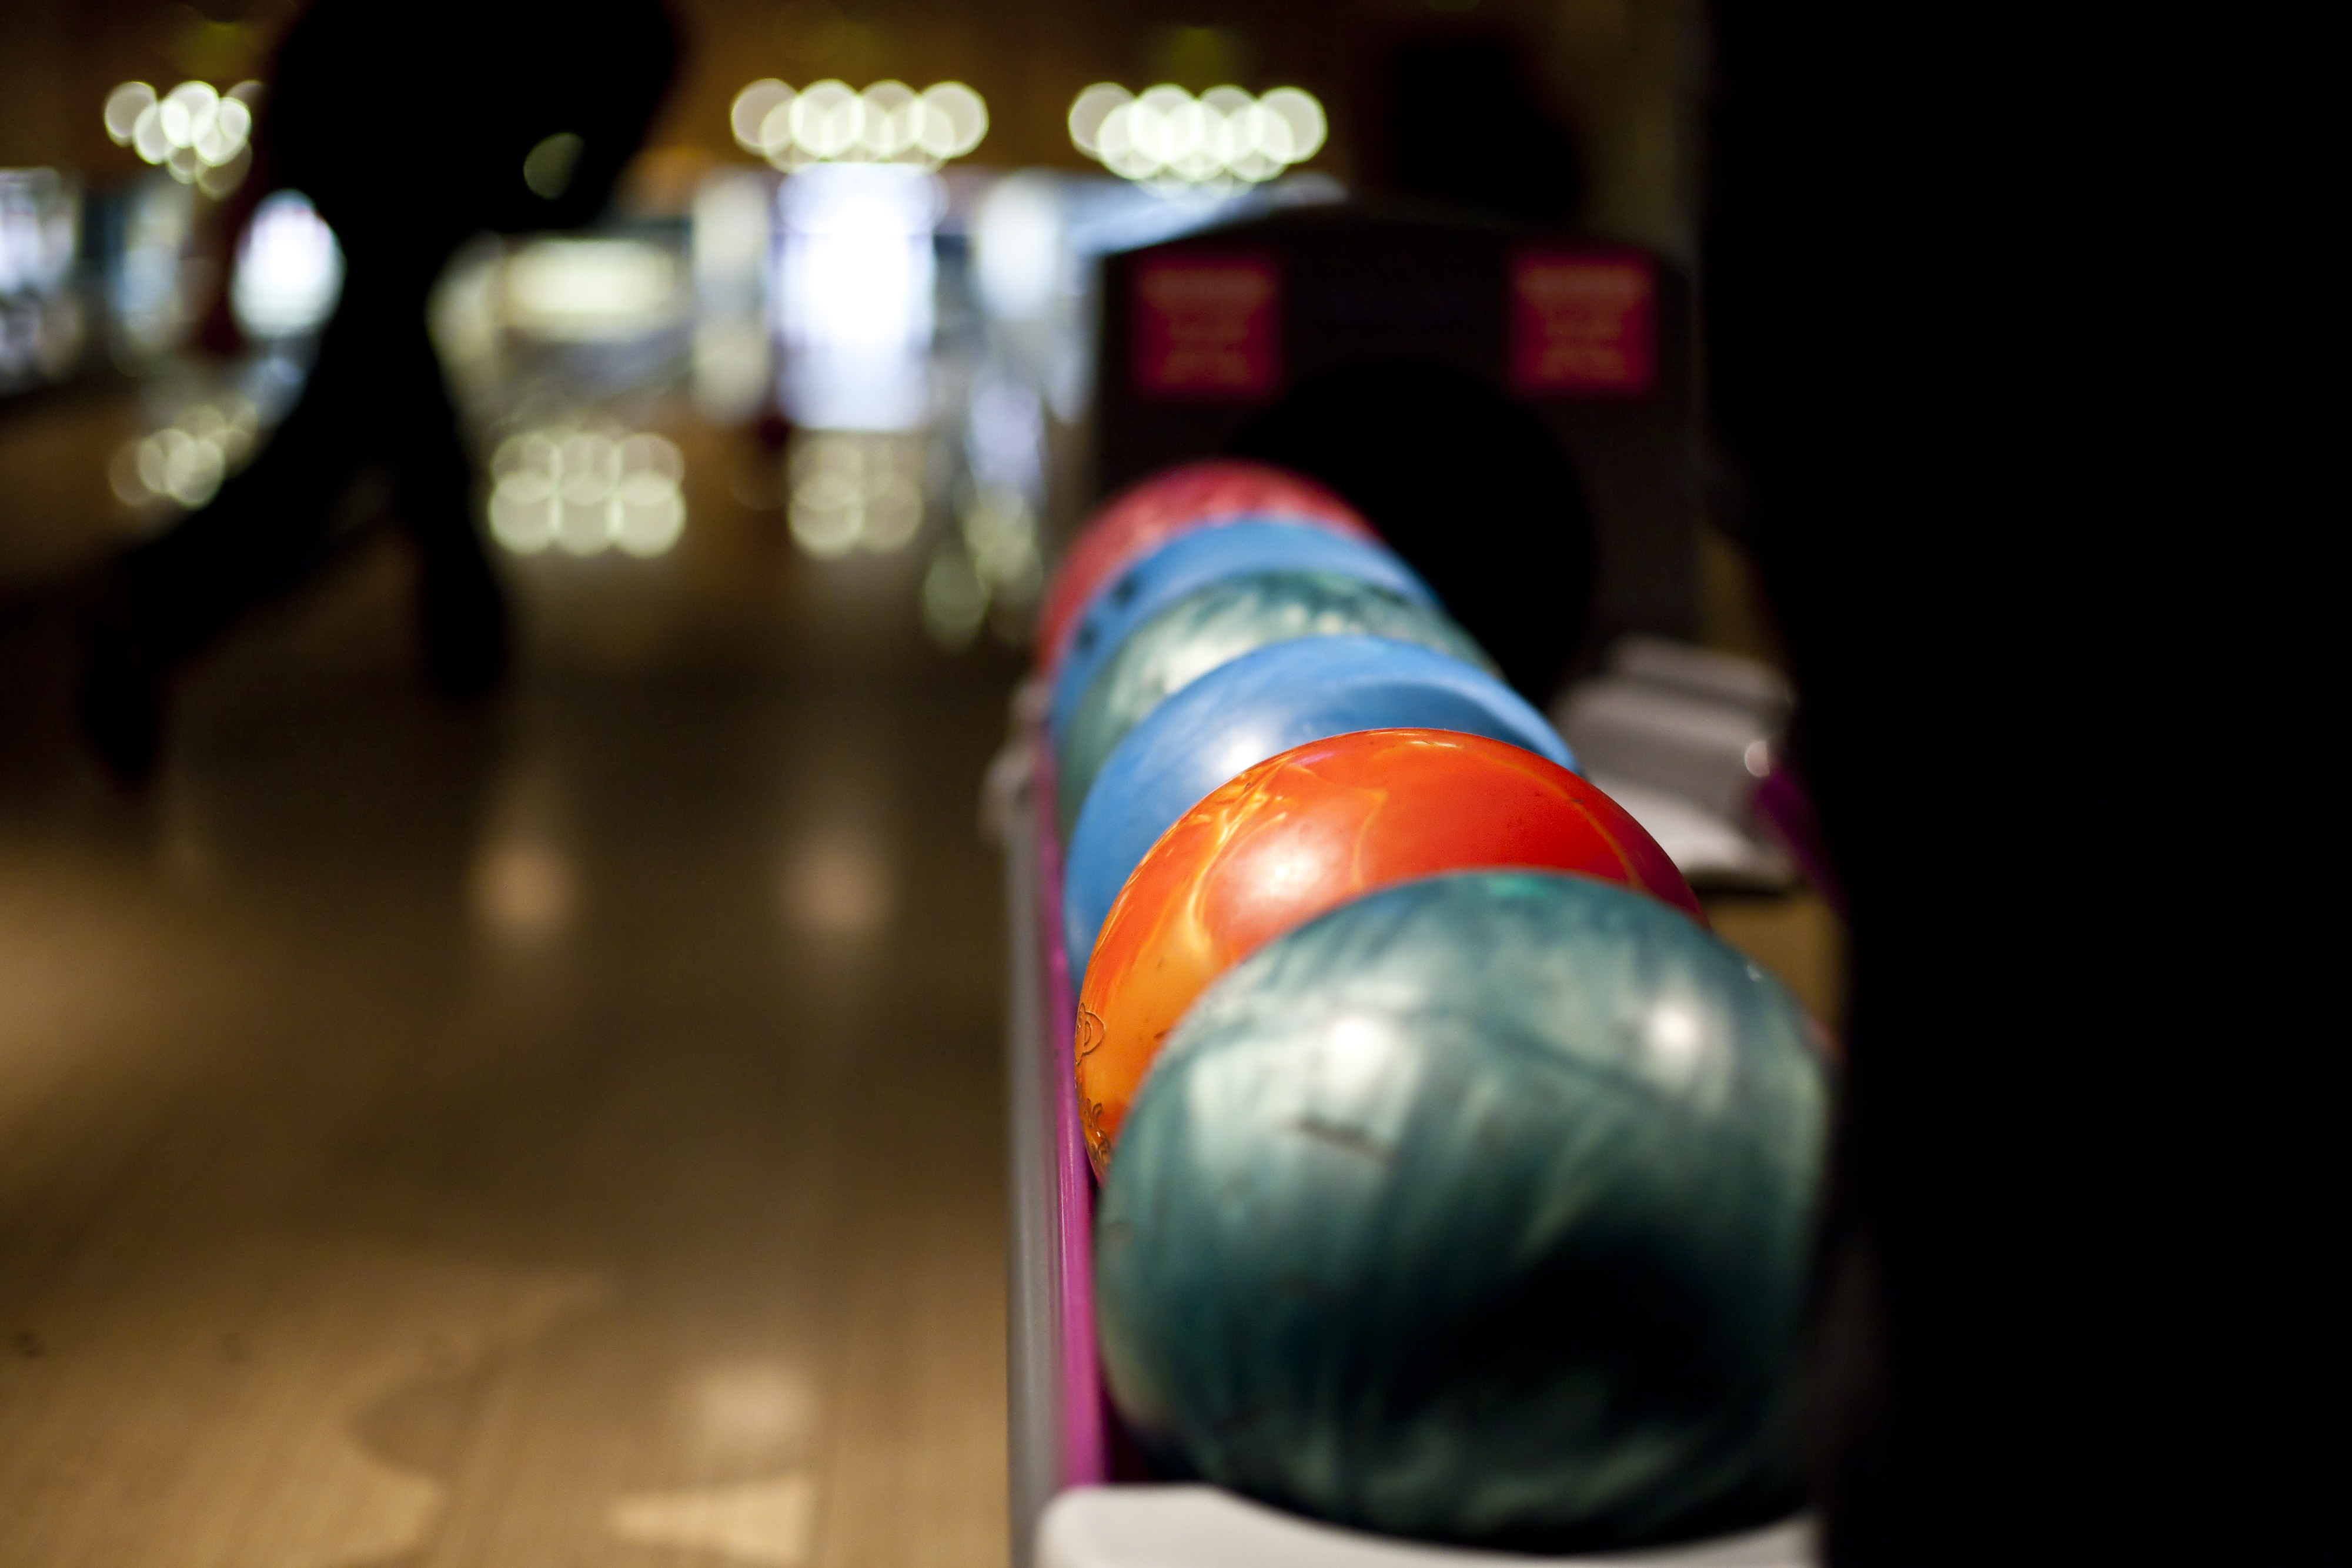 Bowling balls lined up at a bowling alley lane